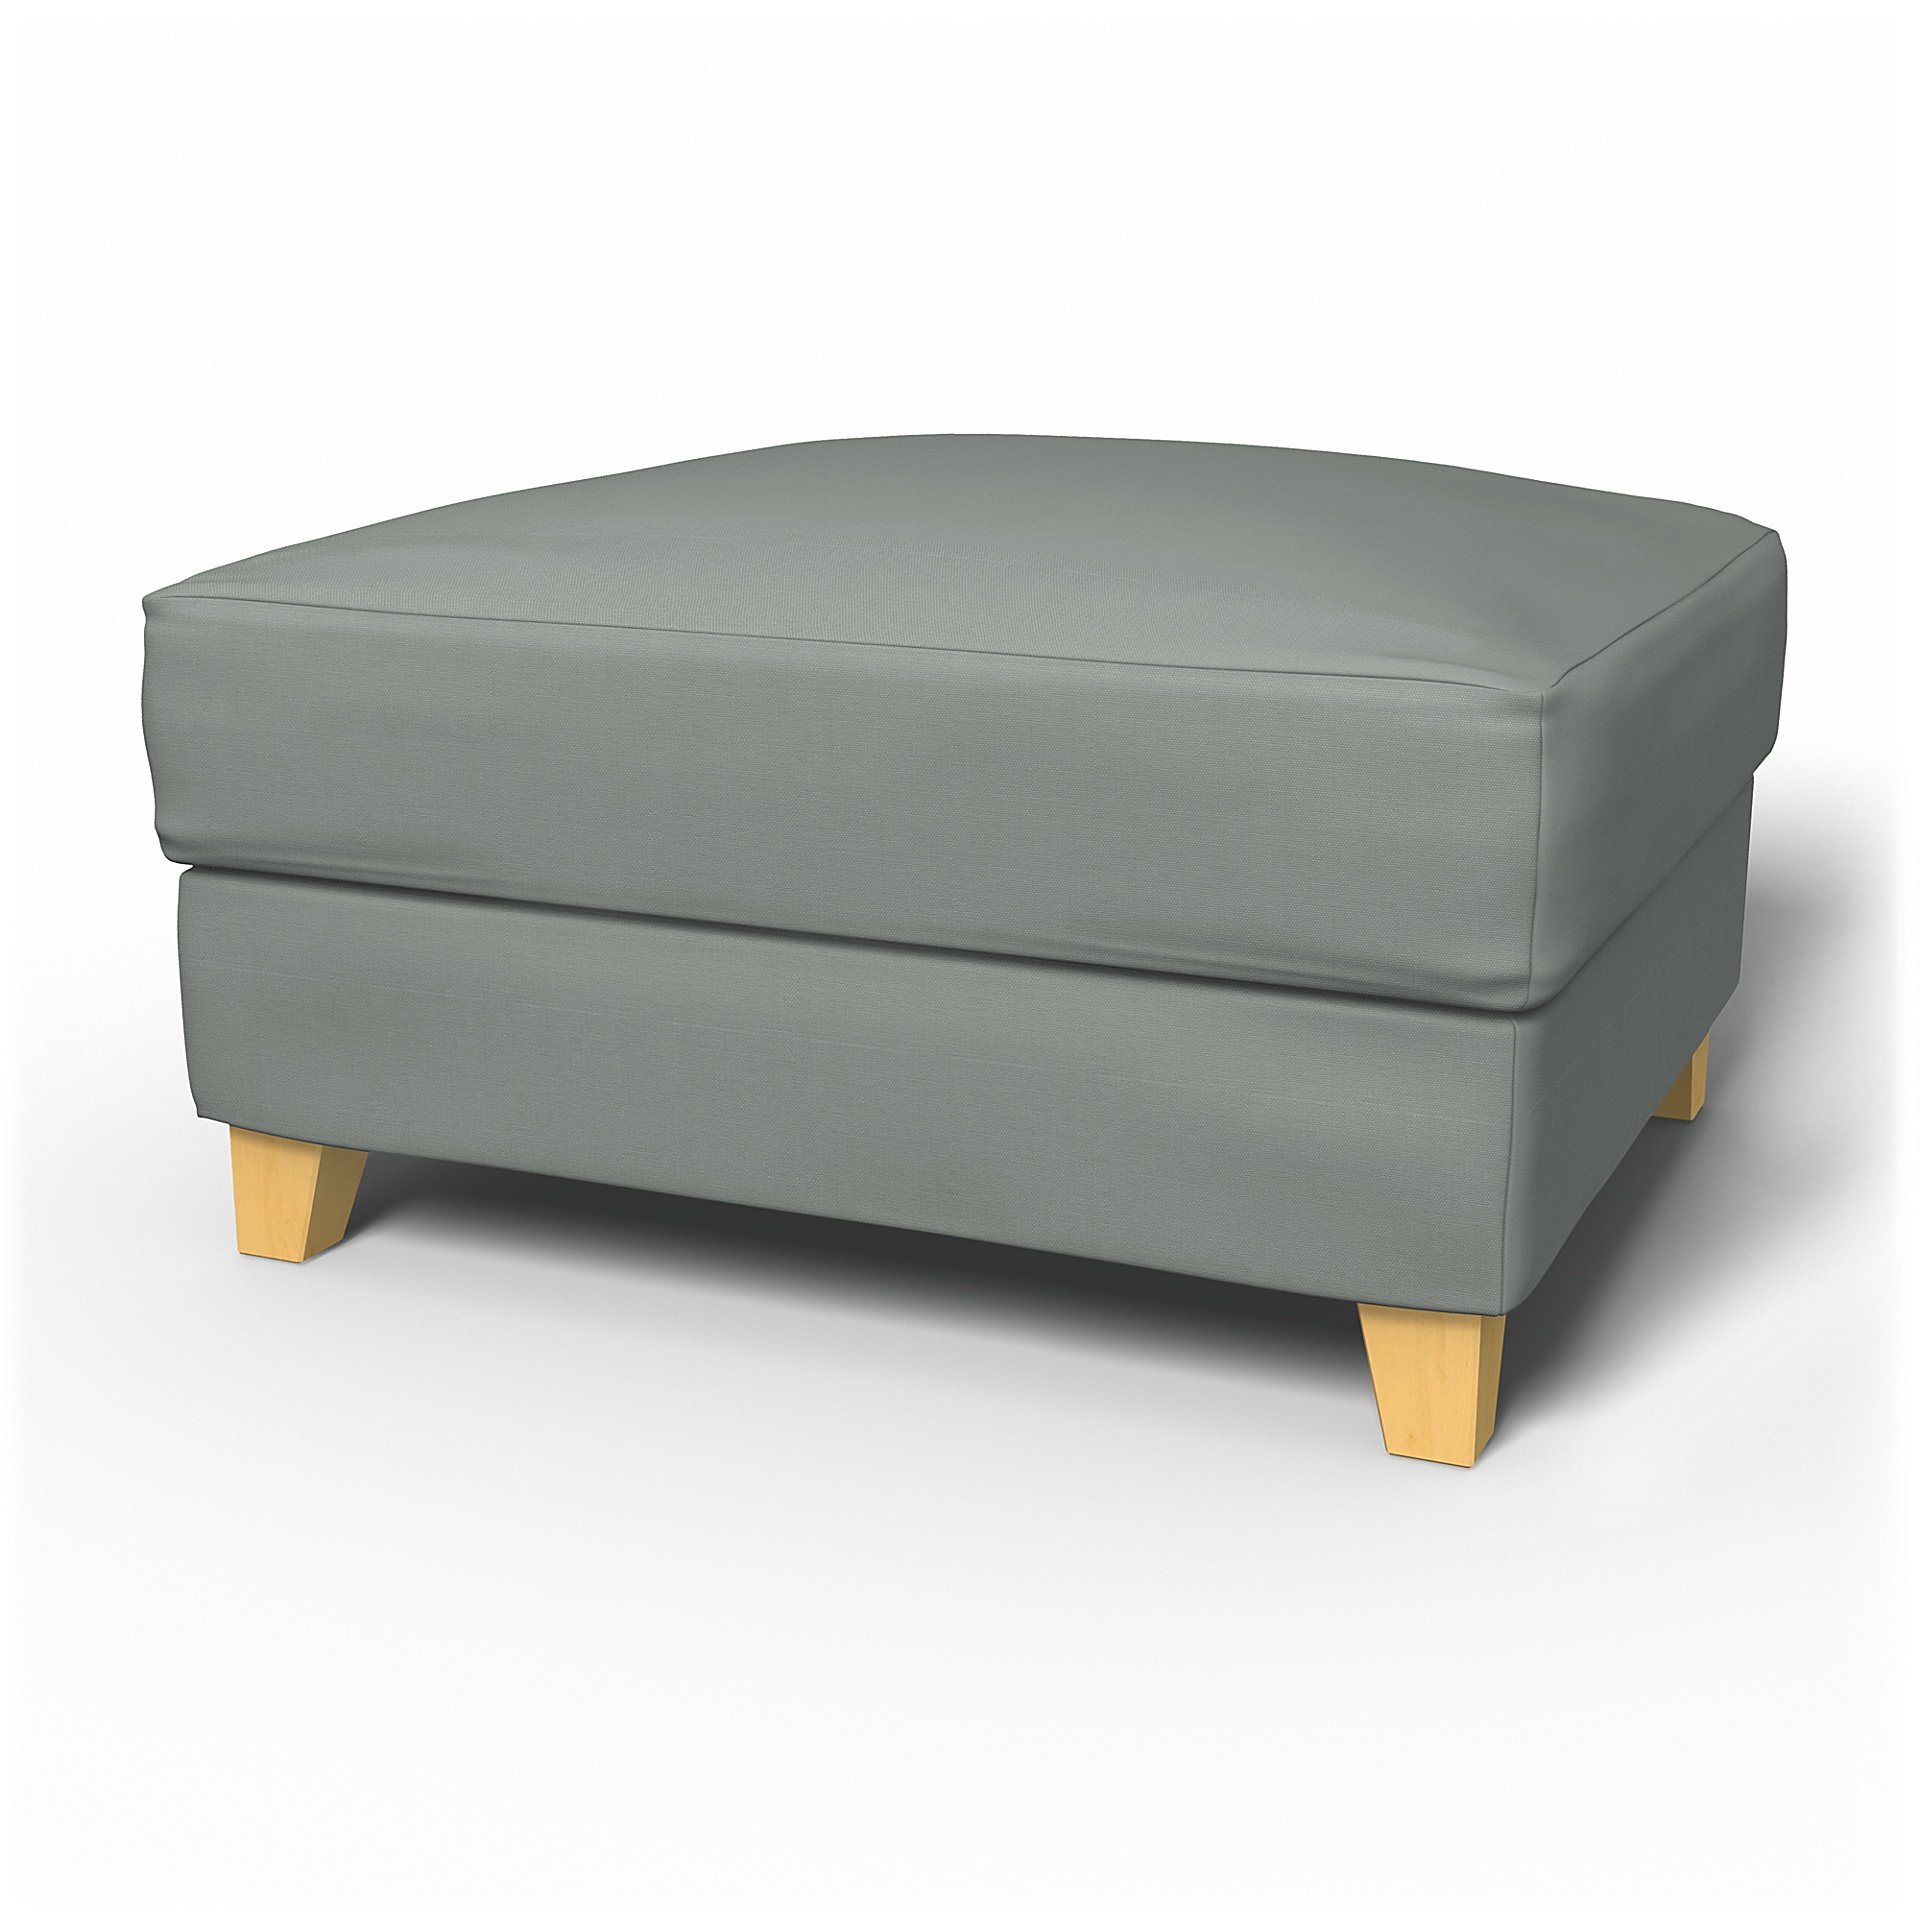 IKEA - Backa Footstool Cover, Drizzle, Cotton - Bemz